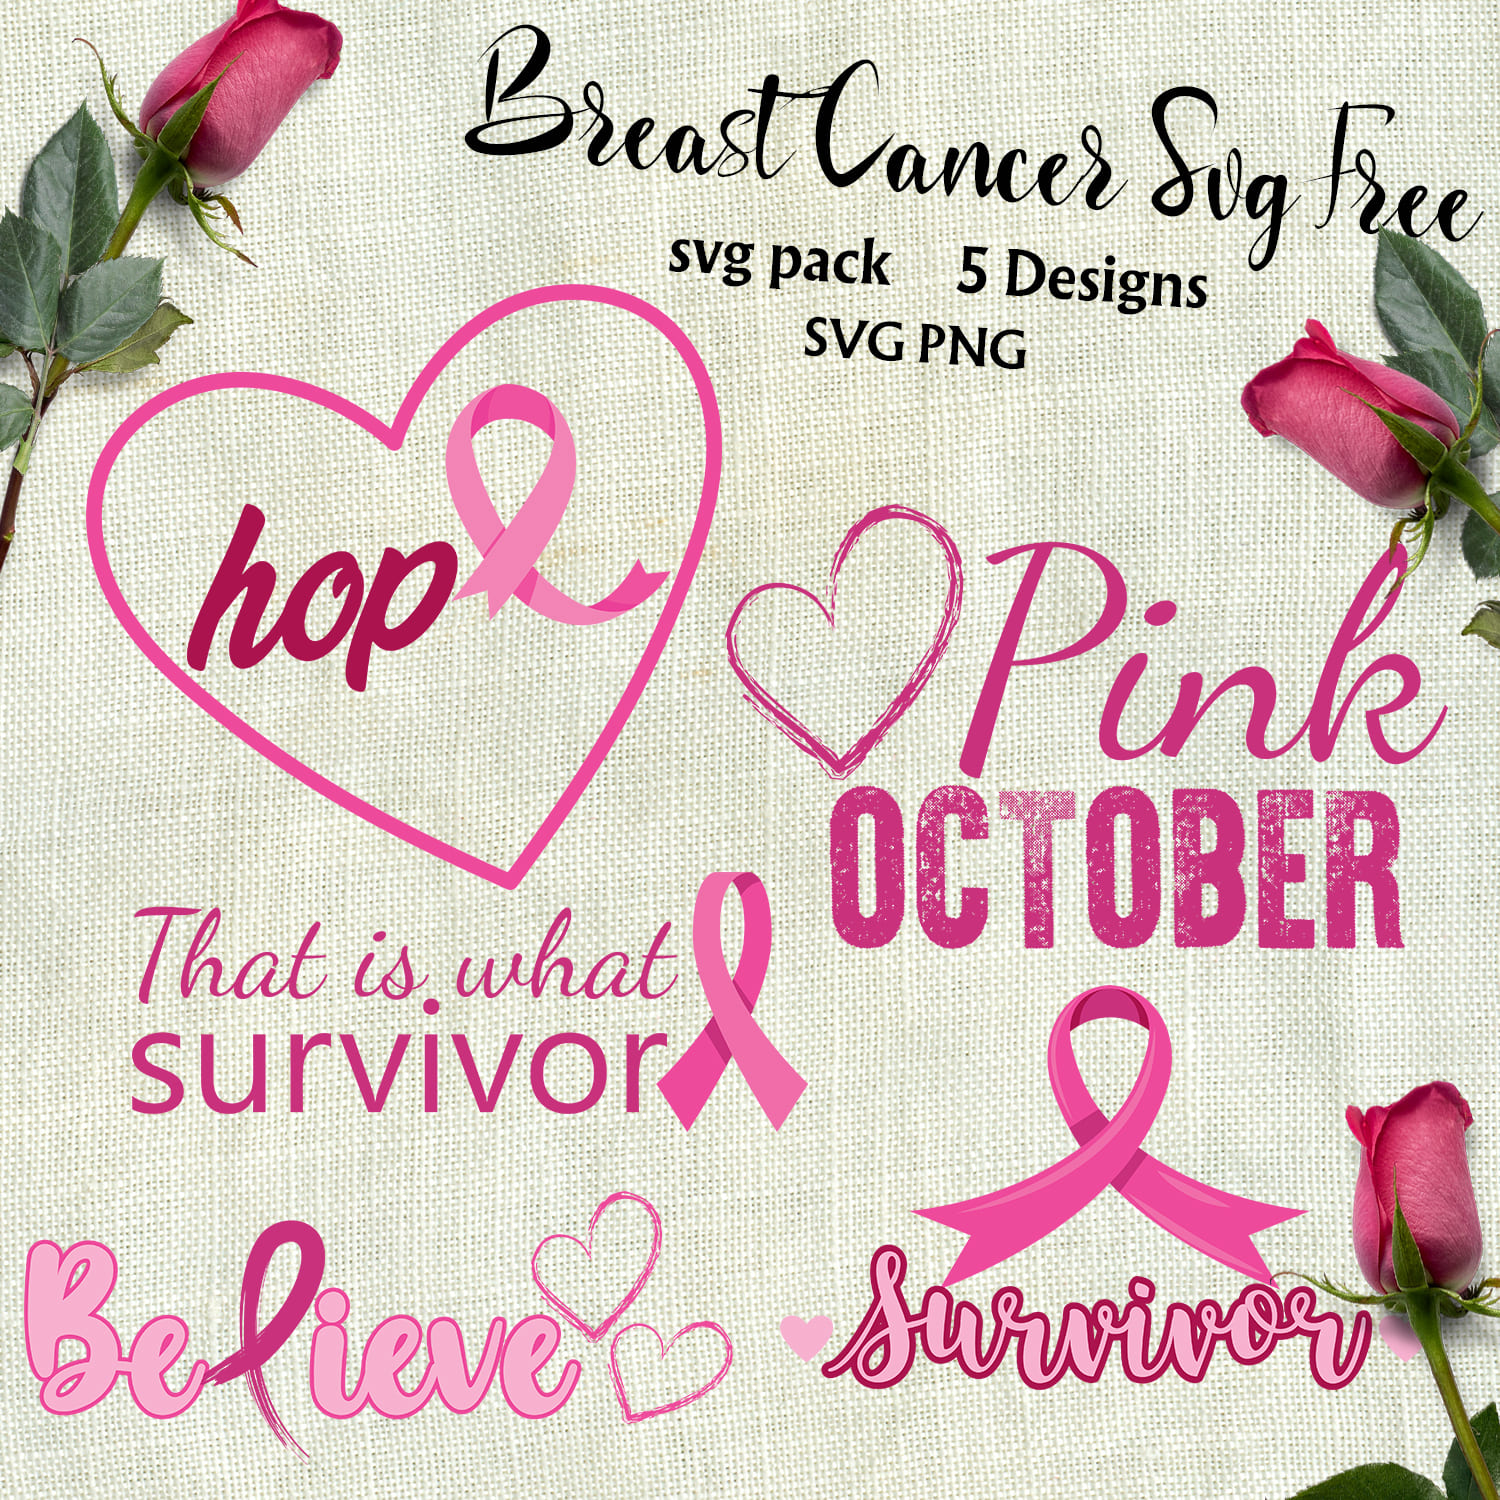 breast cancer svg free.